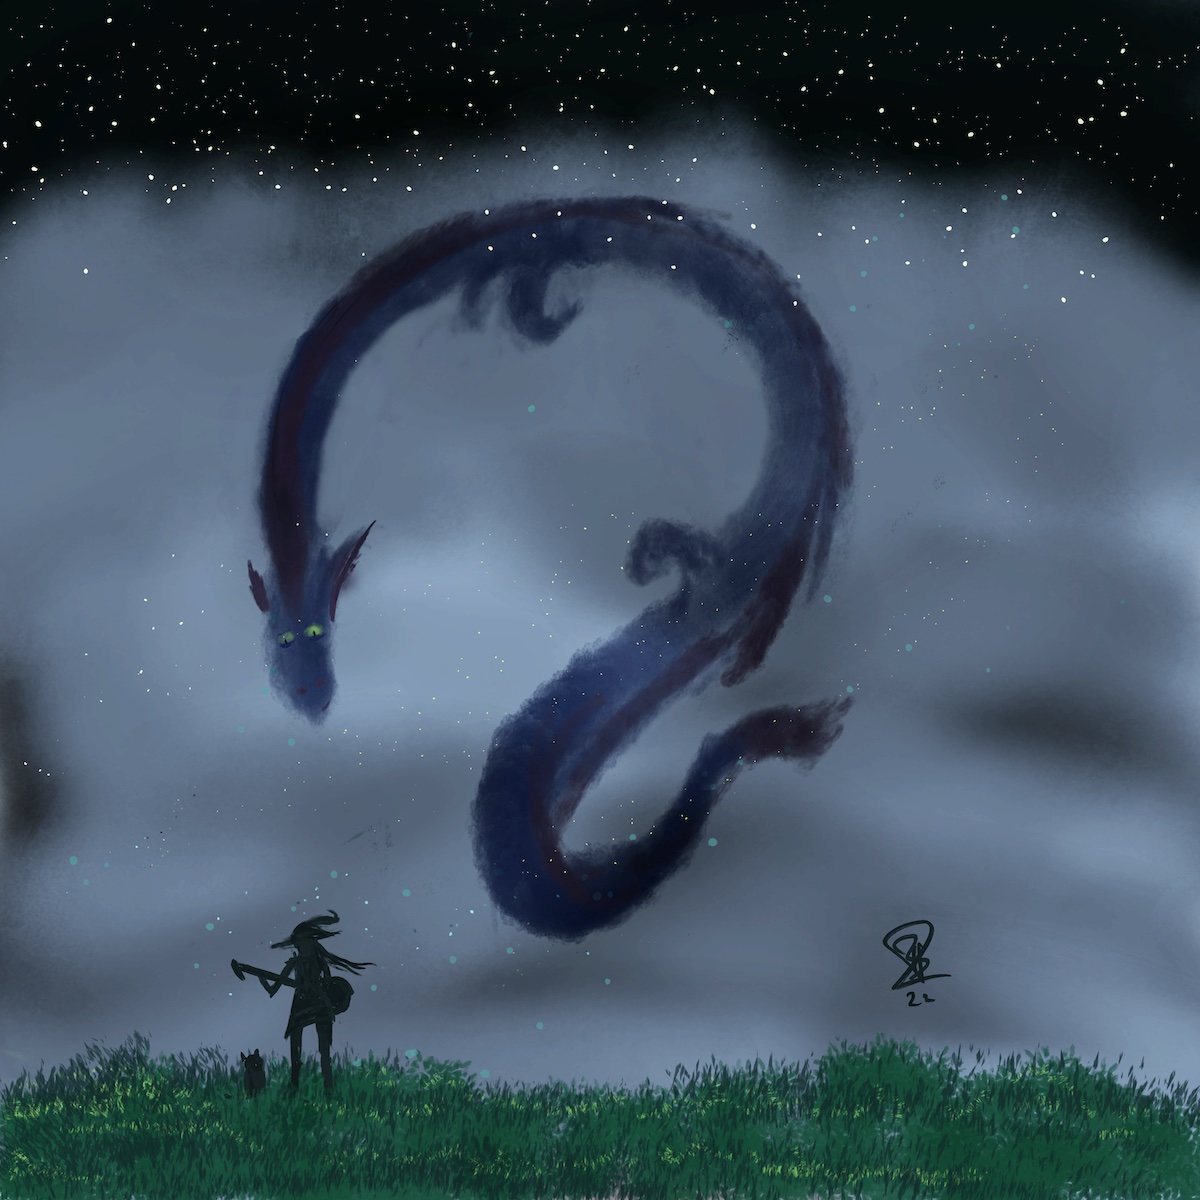 A bard plays a song for a large and squiggly dragon.